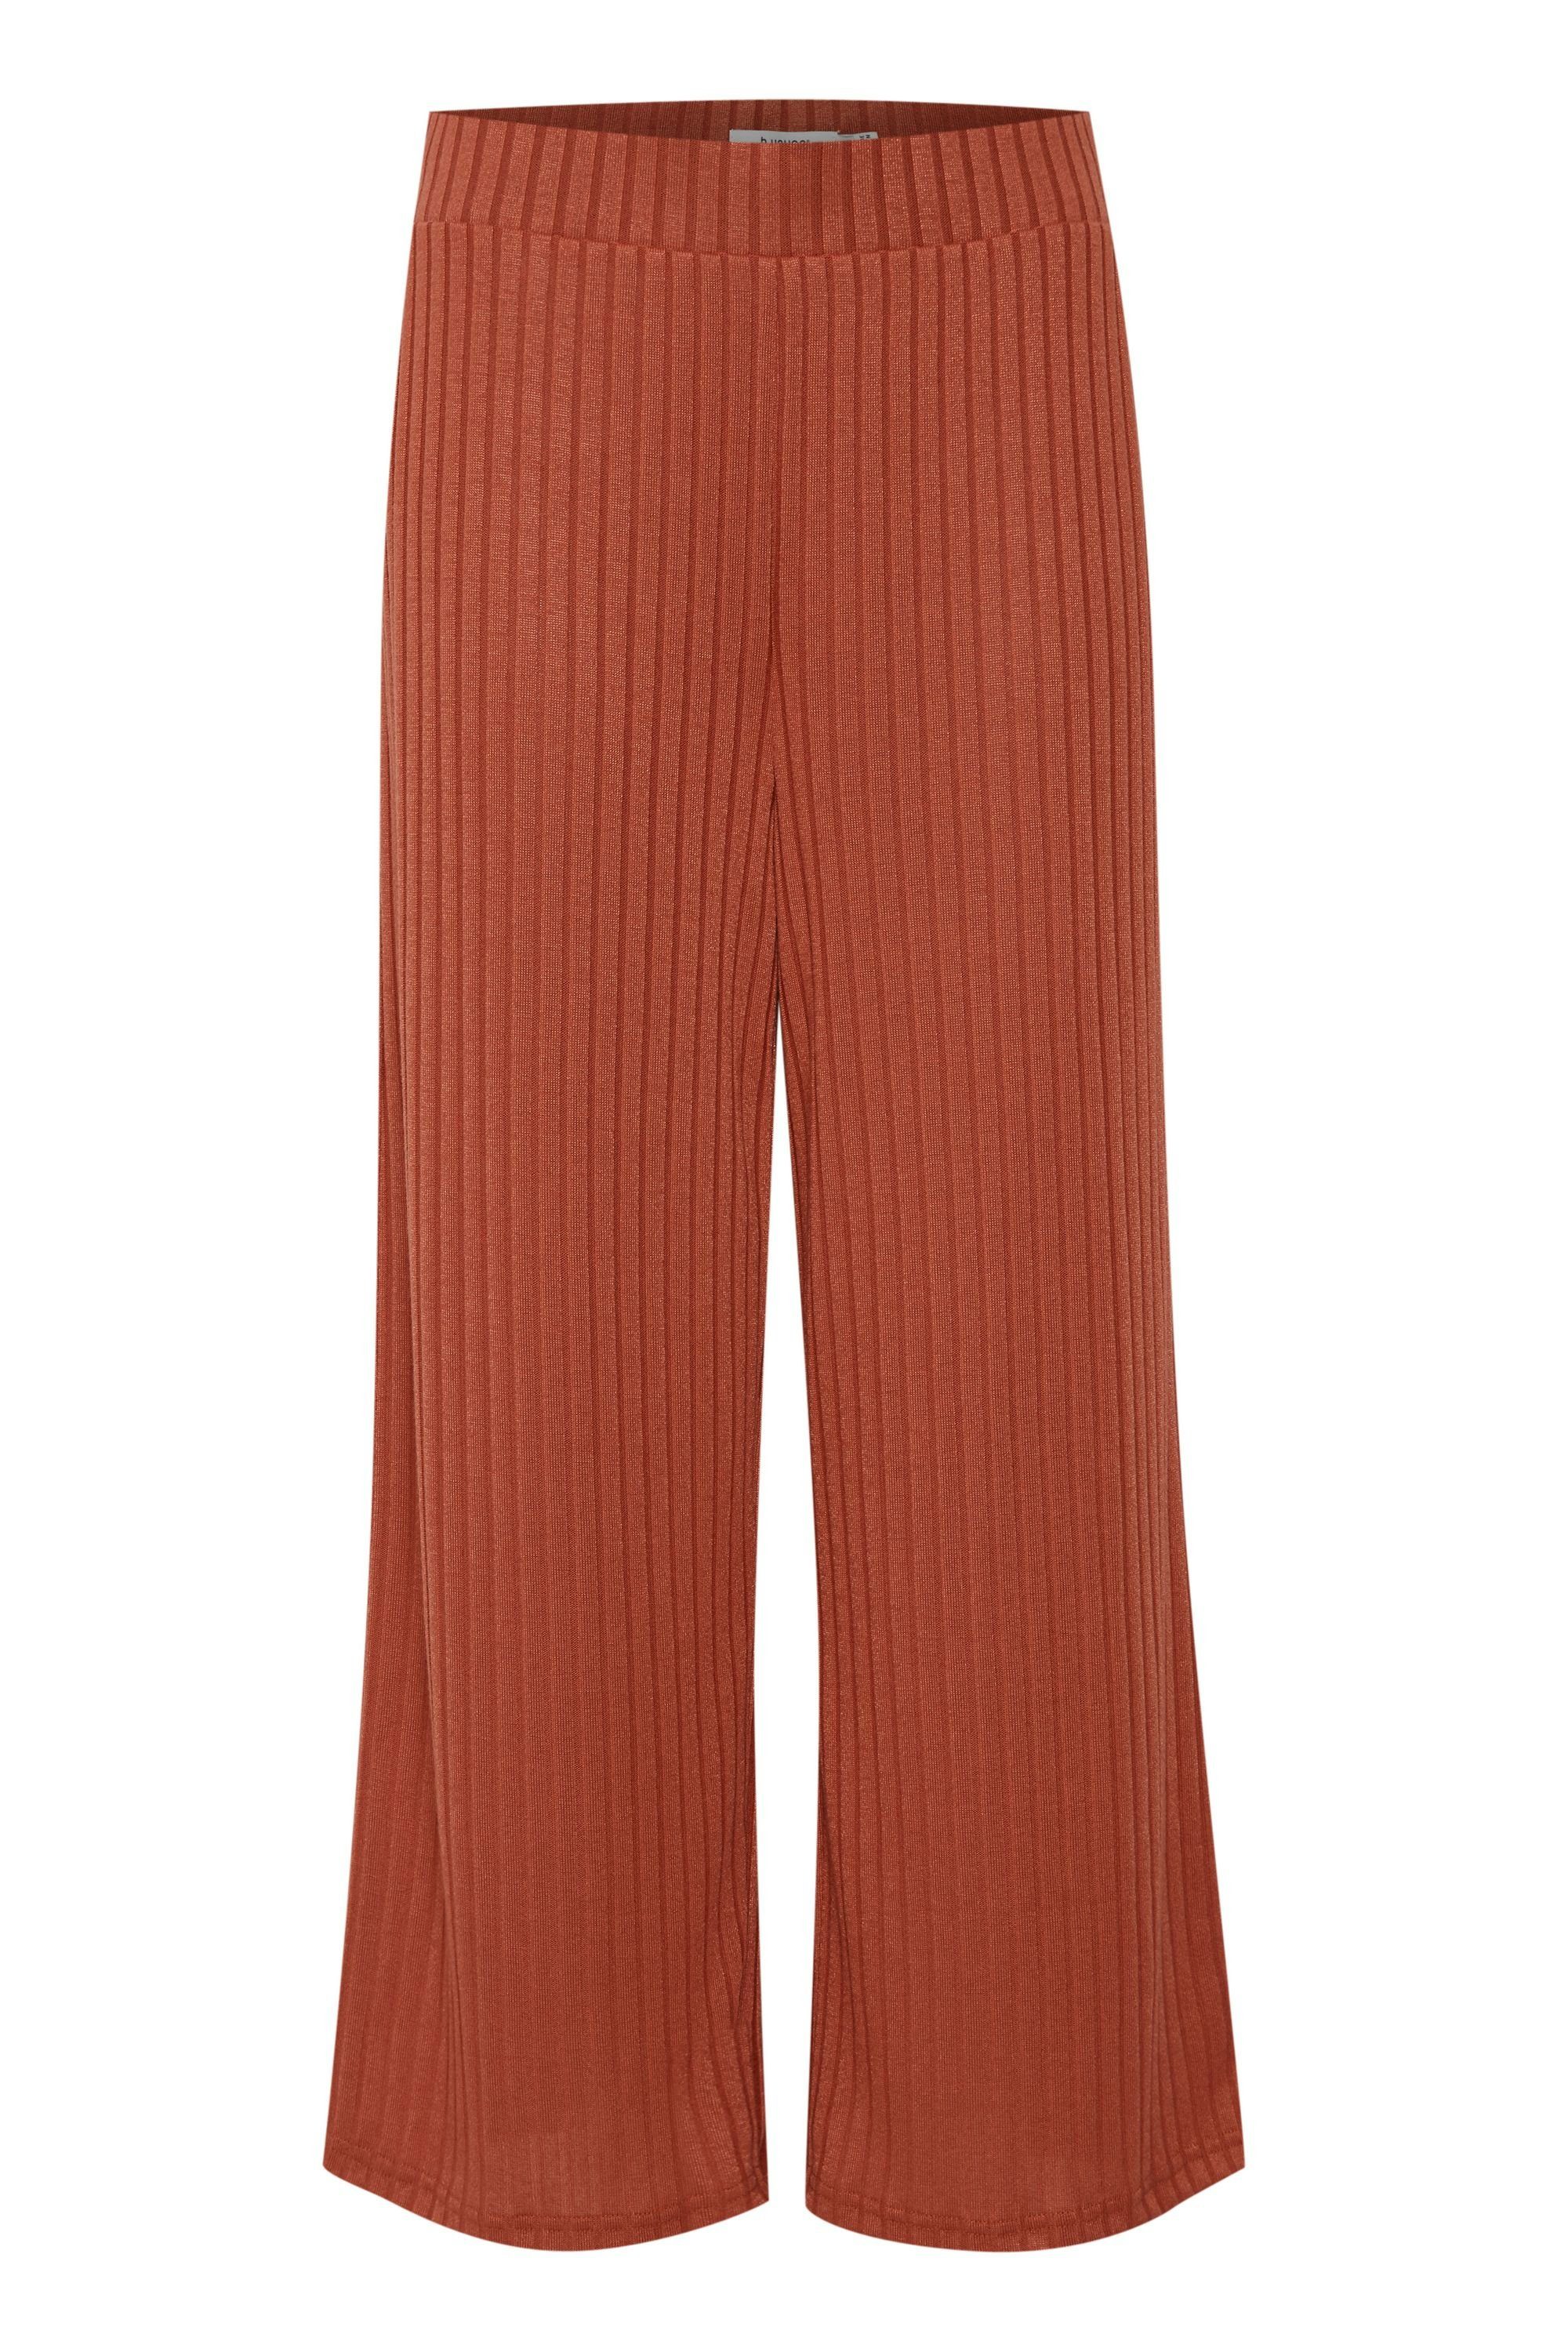 b.young Stoffhose BYSIMONI PANTS - 20809846 Weite 7/8 Stoffhose Etruscan Red (181434)